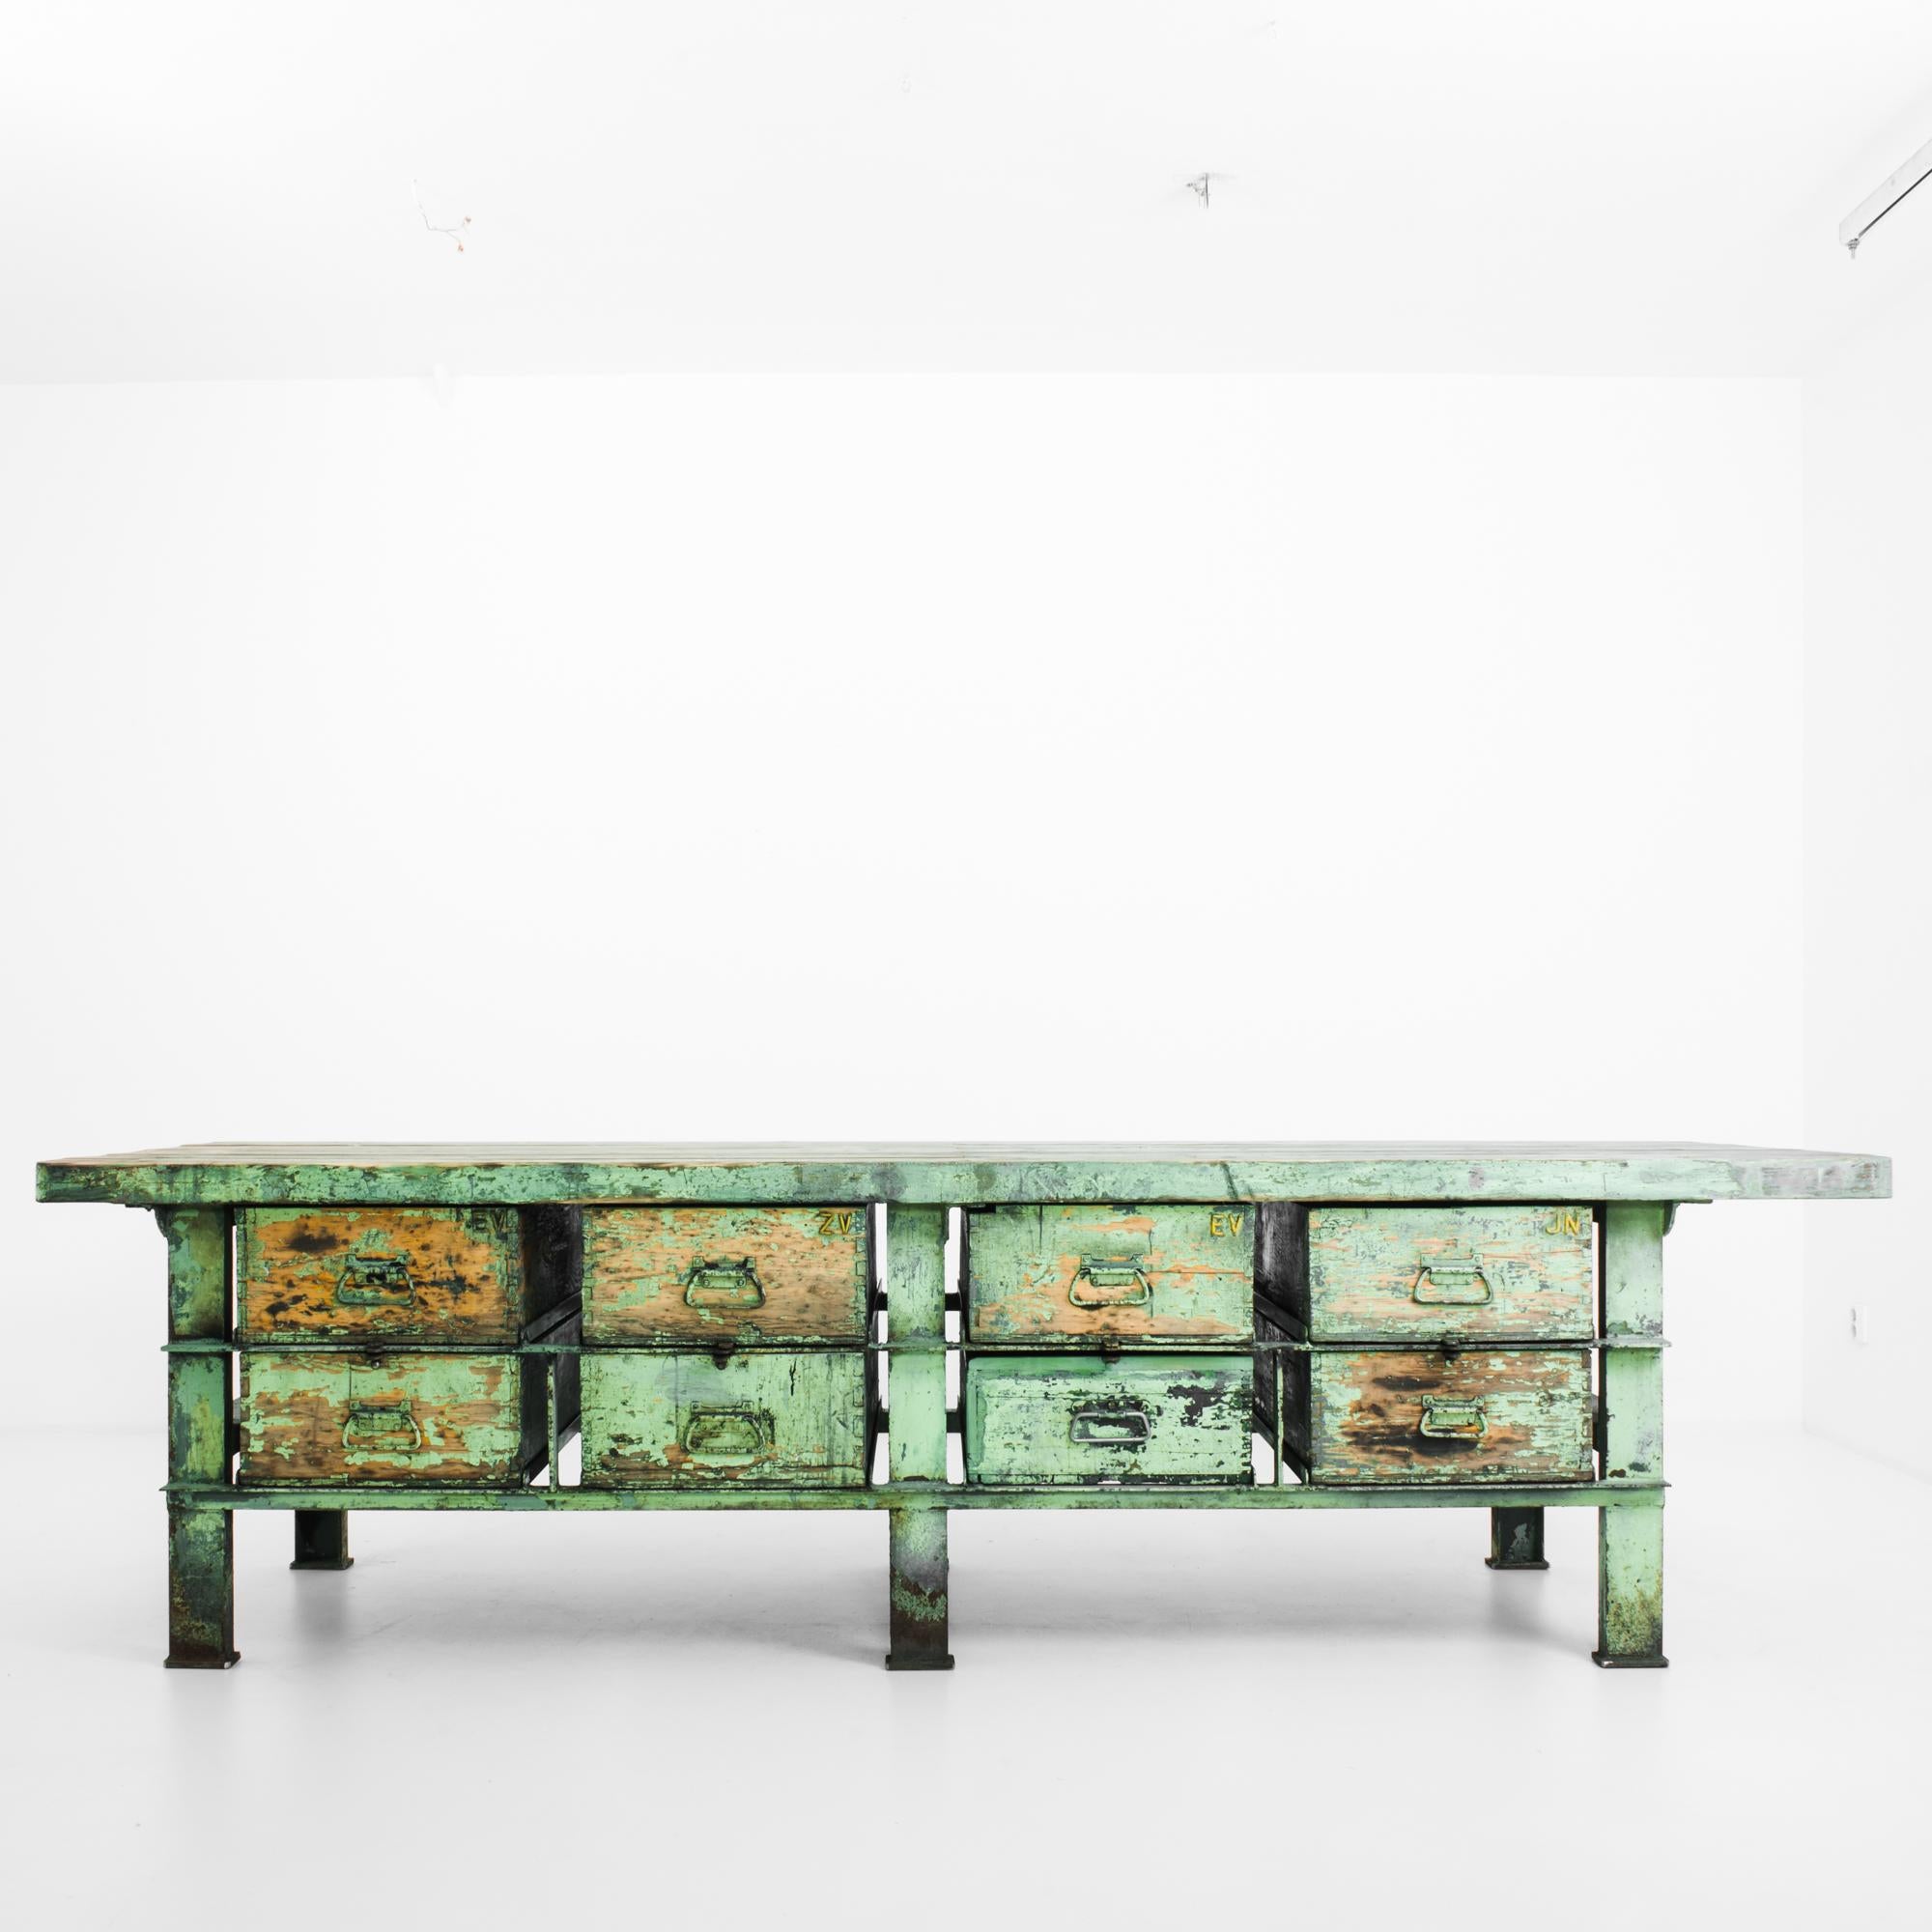 This worktable with a metal frame was made in the former Czechoslovakia, circa 1950. It displays a convivial spring green patina, seasoned to reveal the golden hues of the wooden tabletop and drawers. The table is sturdily constructed with six